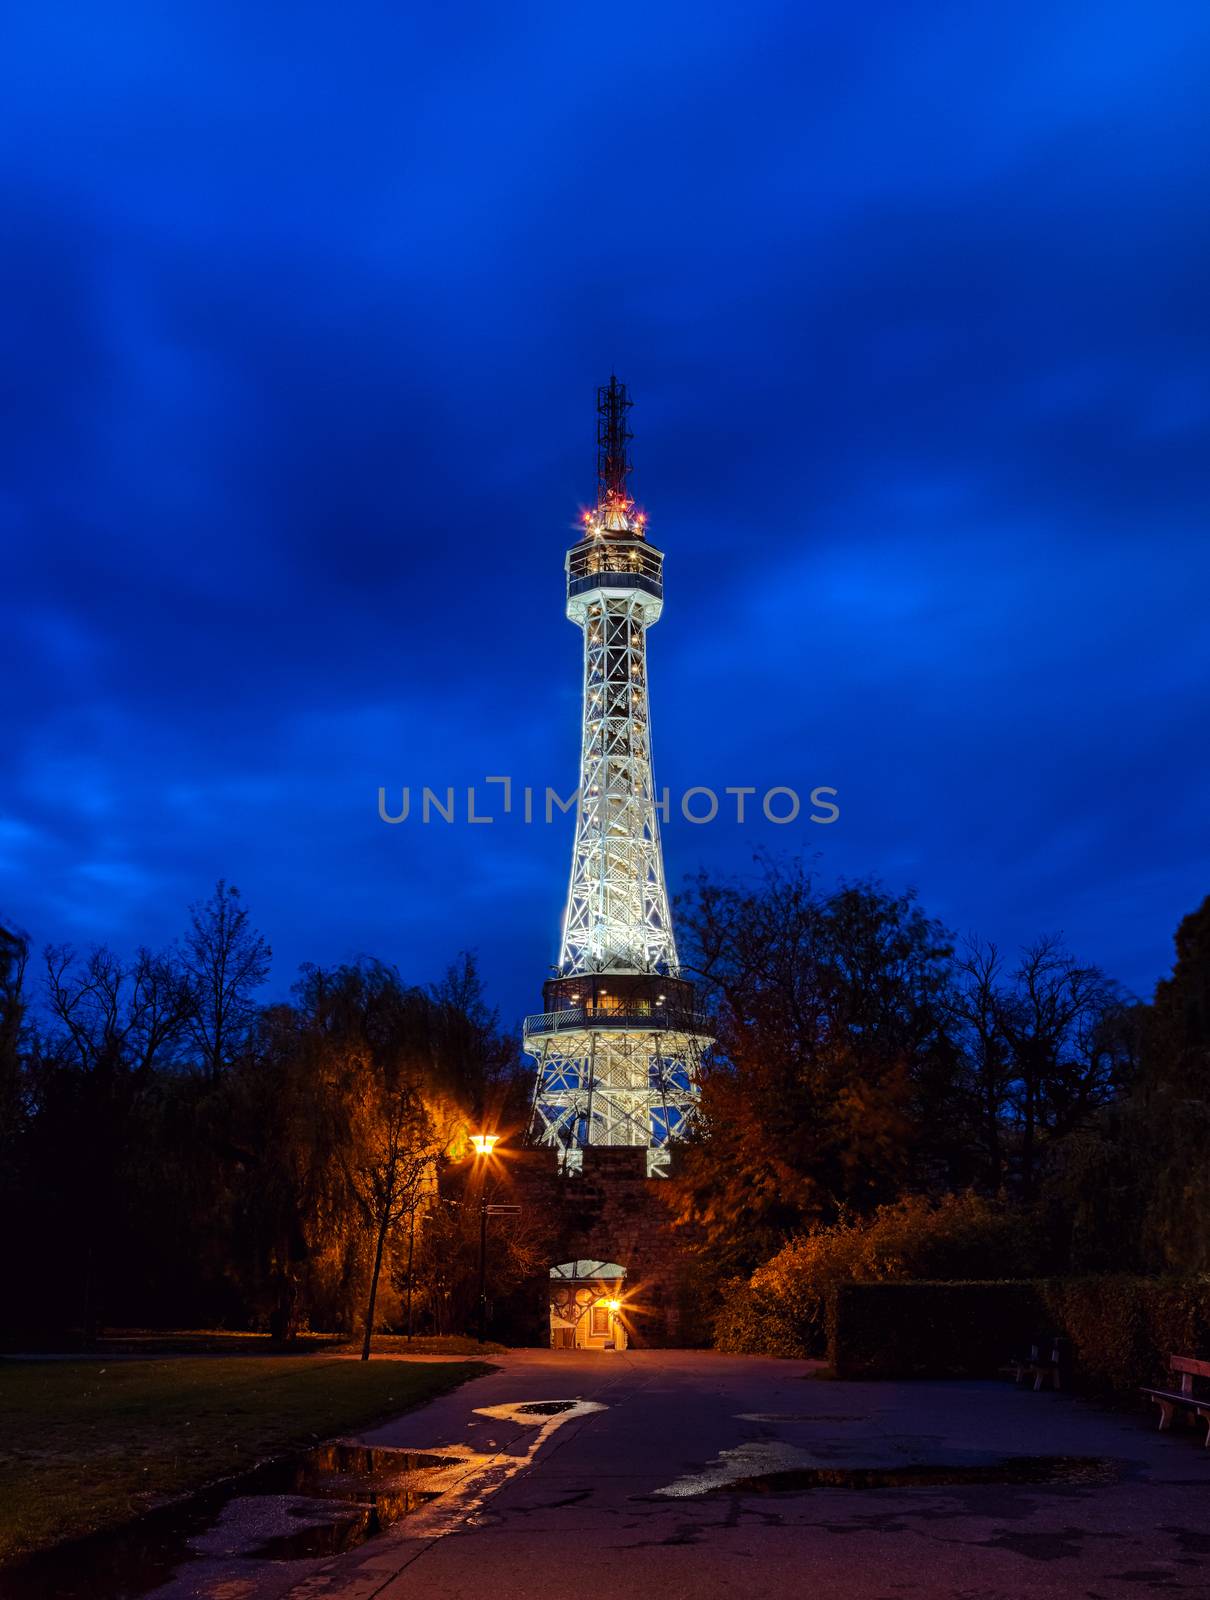 Prague Lookout Tower with the night illumination by hanusst